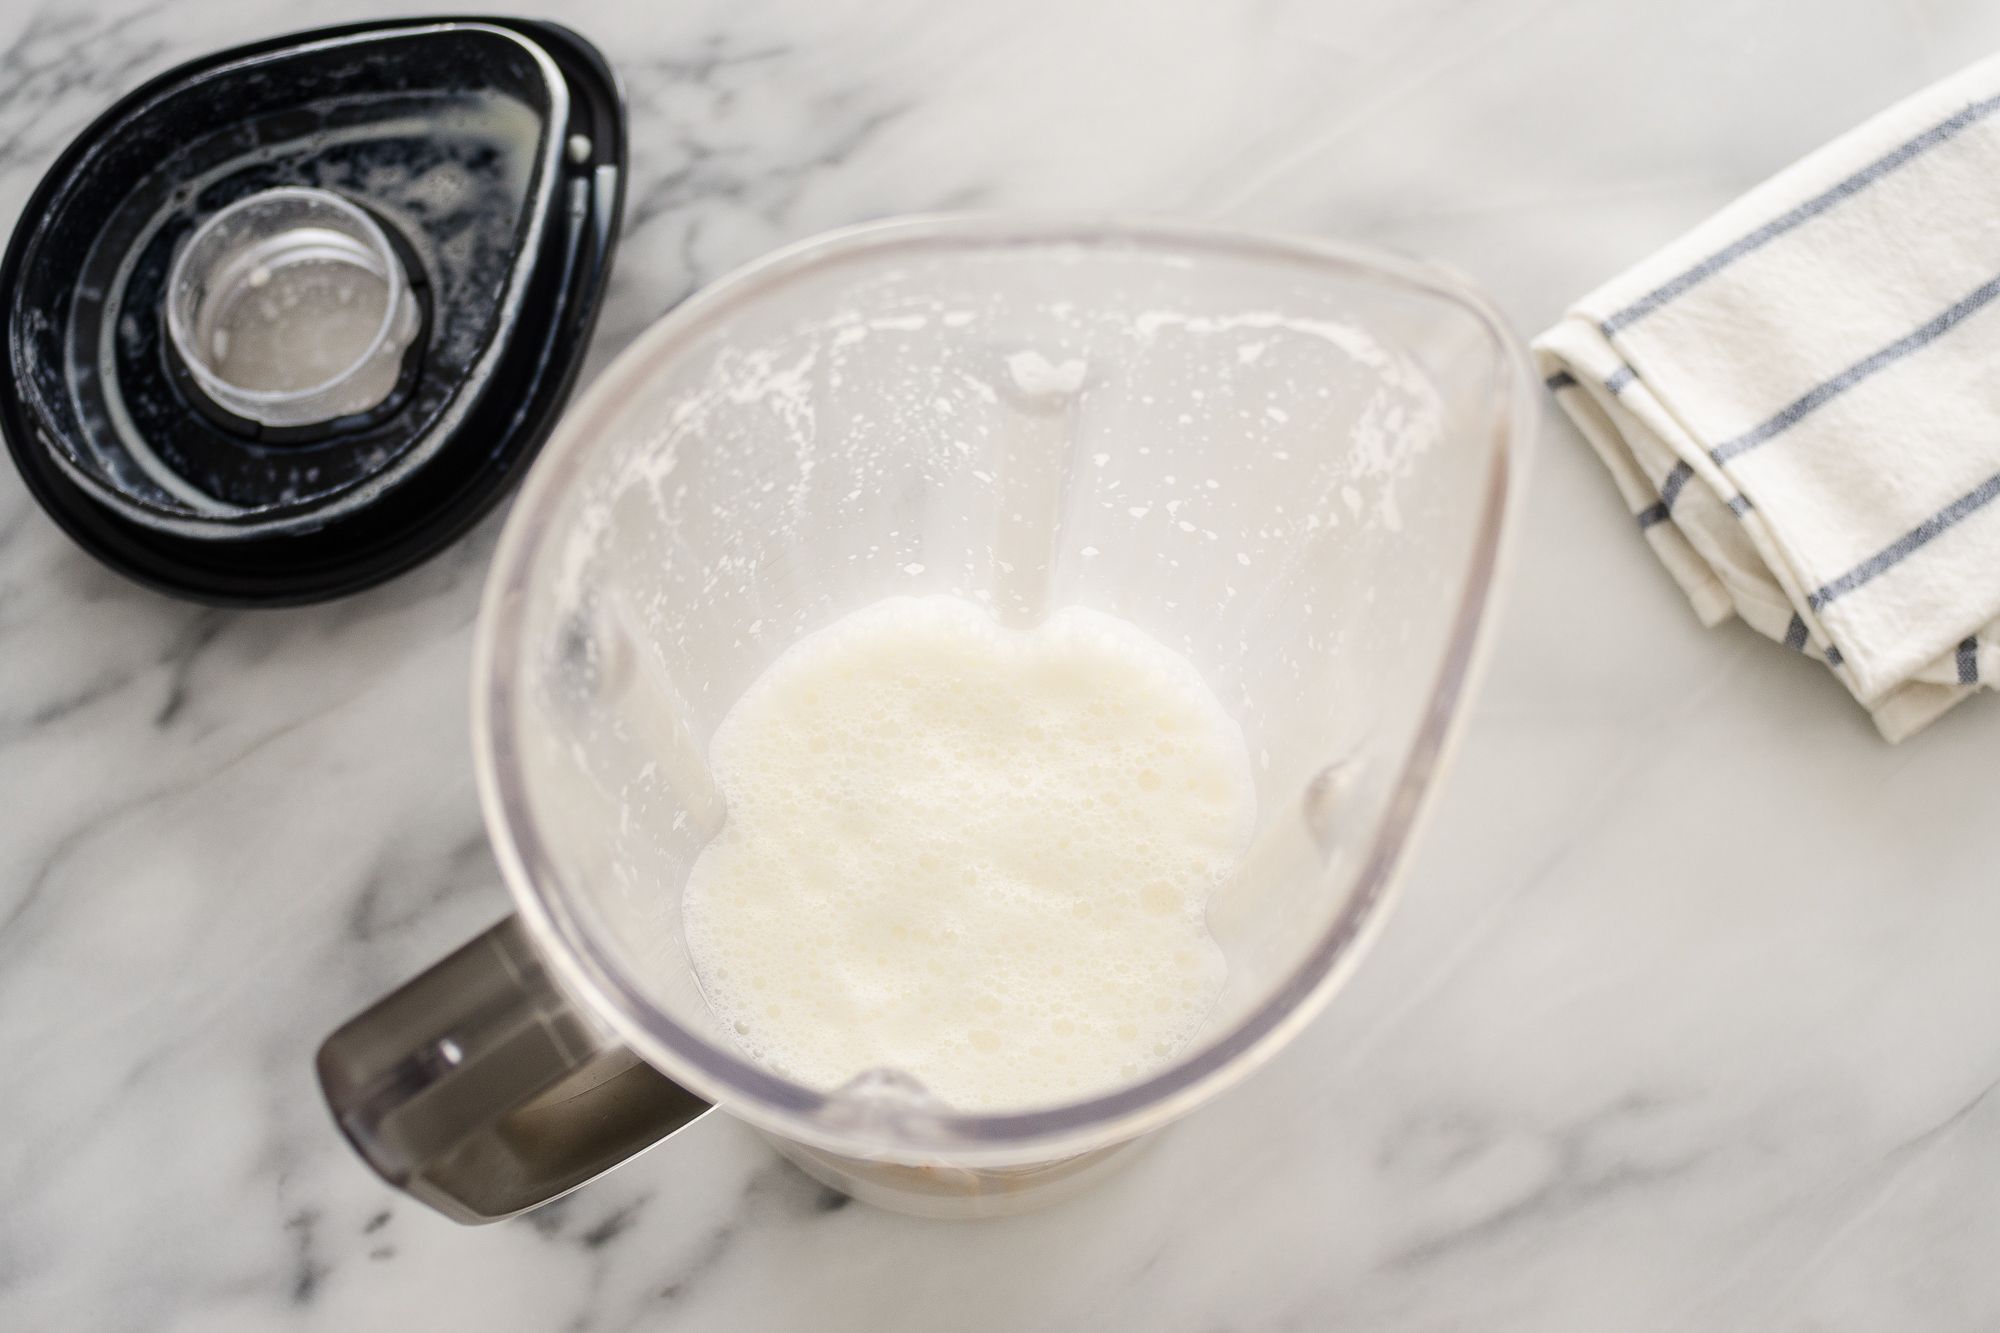 https://hips.hearstapps.com/thepioneerwoman/wp-content/uploads/2017/01/how-to-froth-milk-without-an-espresso-machine-09.jpg